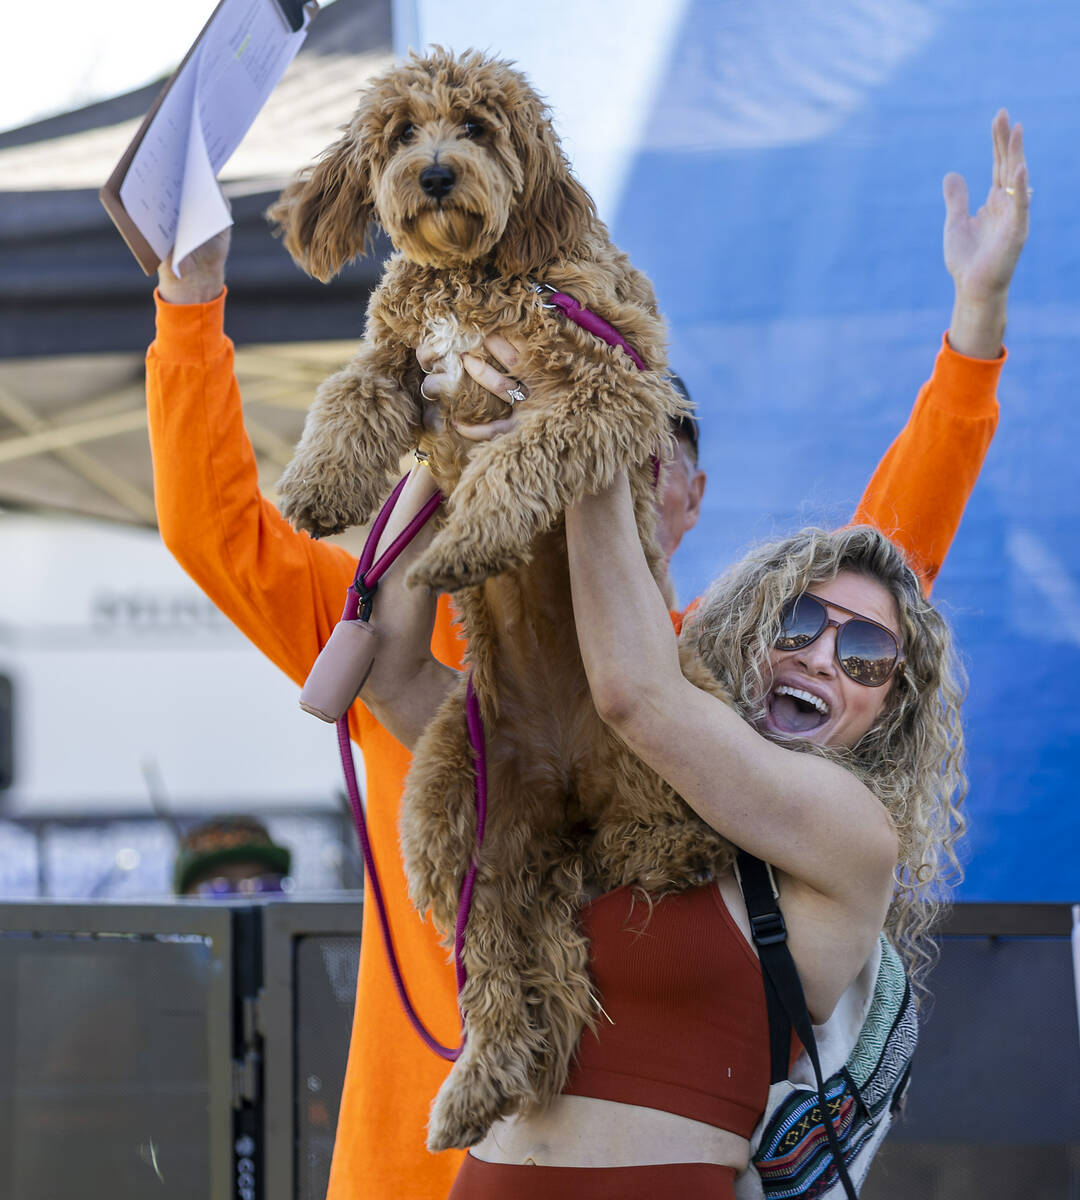 Sarah Starr holds her dog Hazel up high as she celebrates their owner/dog look-alike contest wi ...